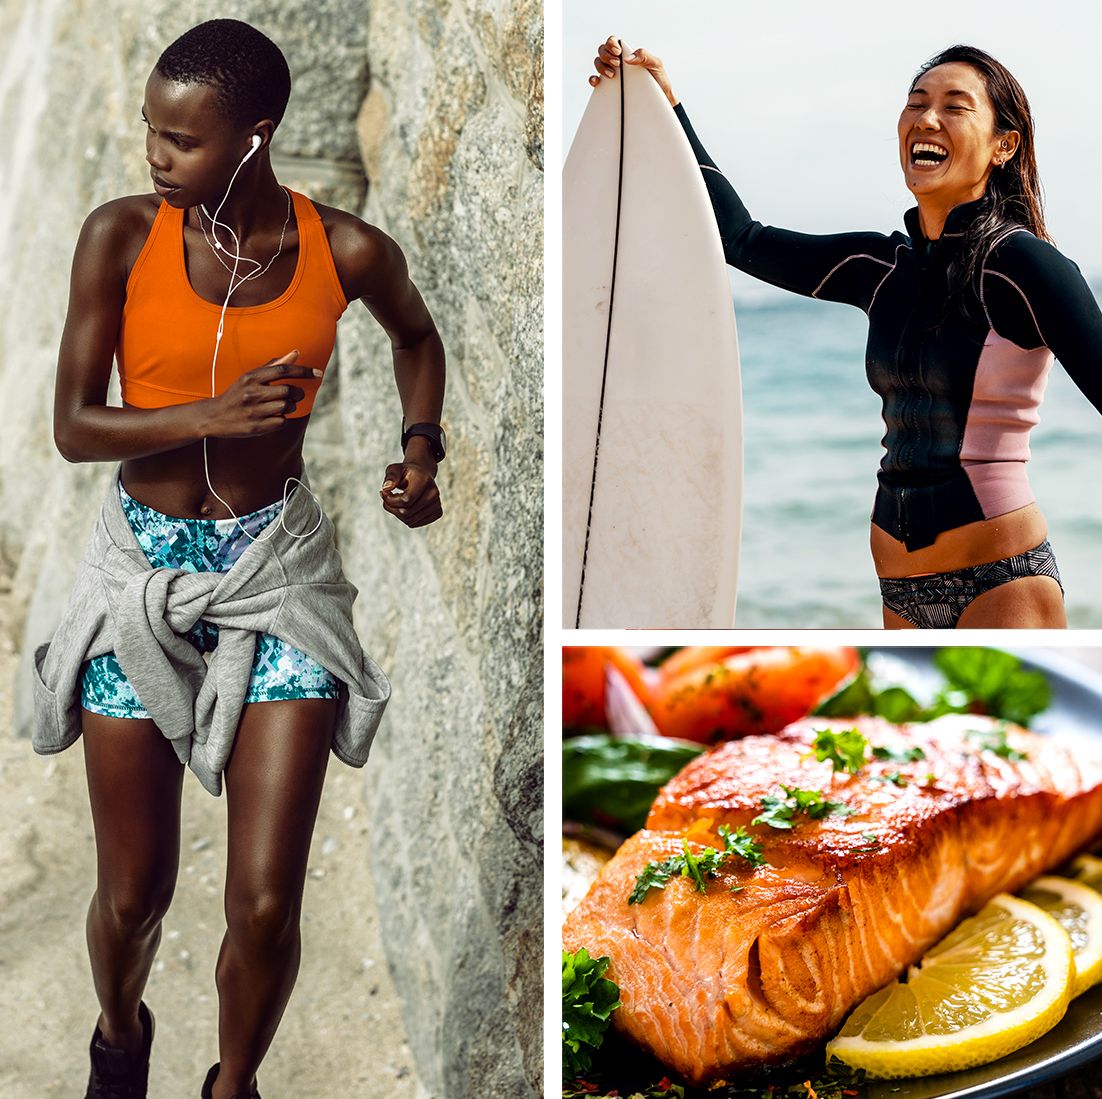 These experts are calling next on these health, fitness, and beauty trends